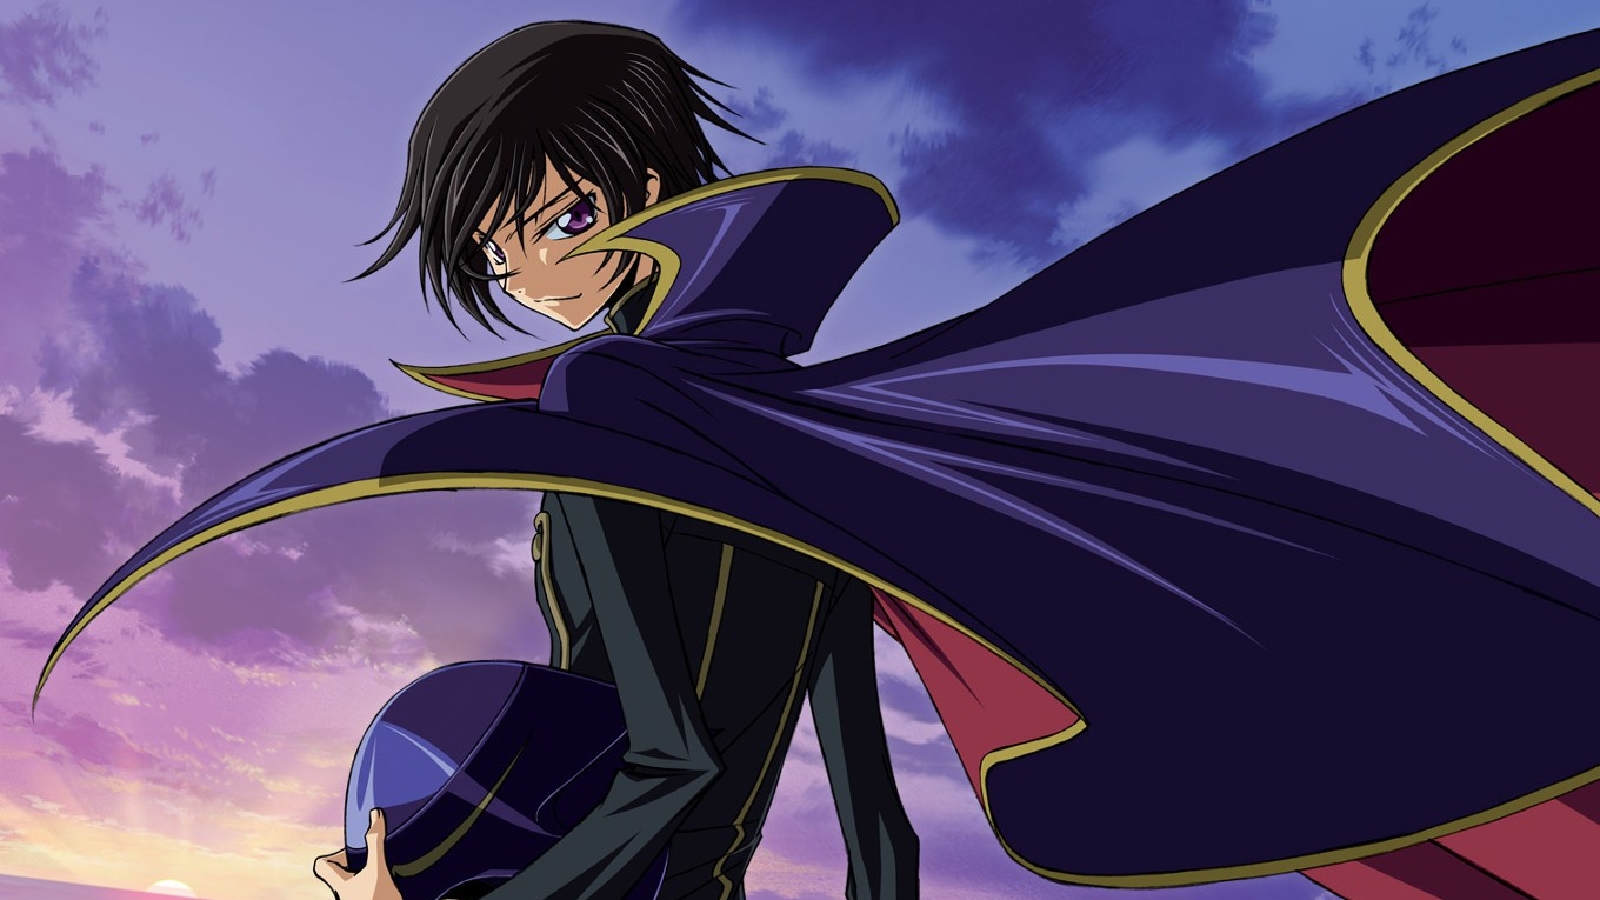 Code Geass: Lelouch of the Rebellion - I drink and watch anime